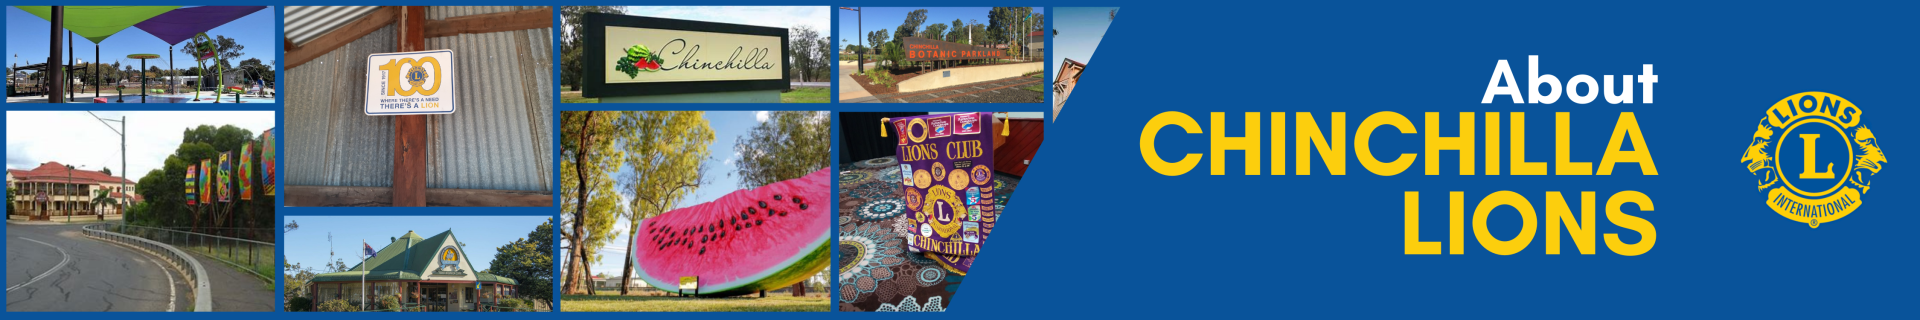 Lions Club Chinchilla About Us Banner